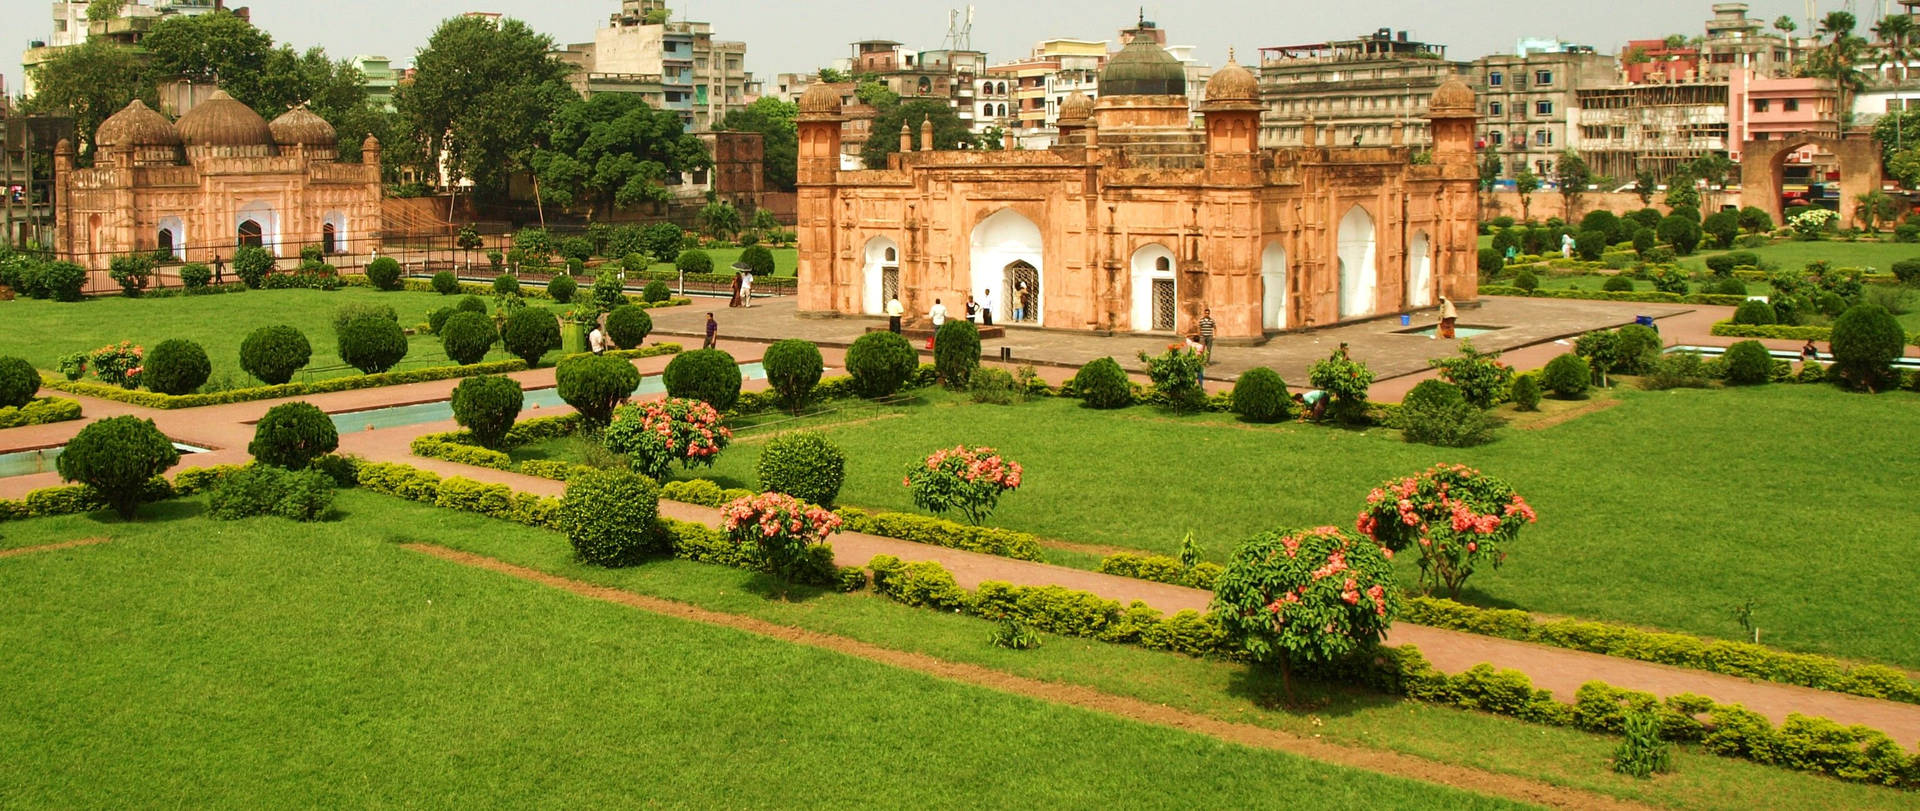 Lalbagh Fort In Dhaka Bangladesh Background